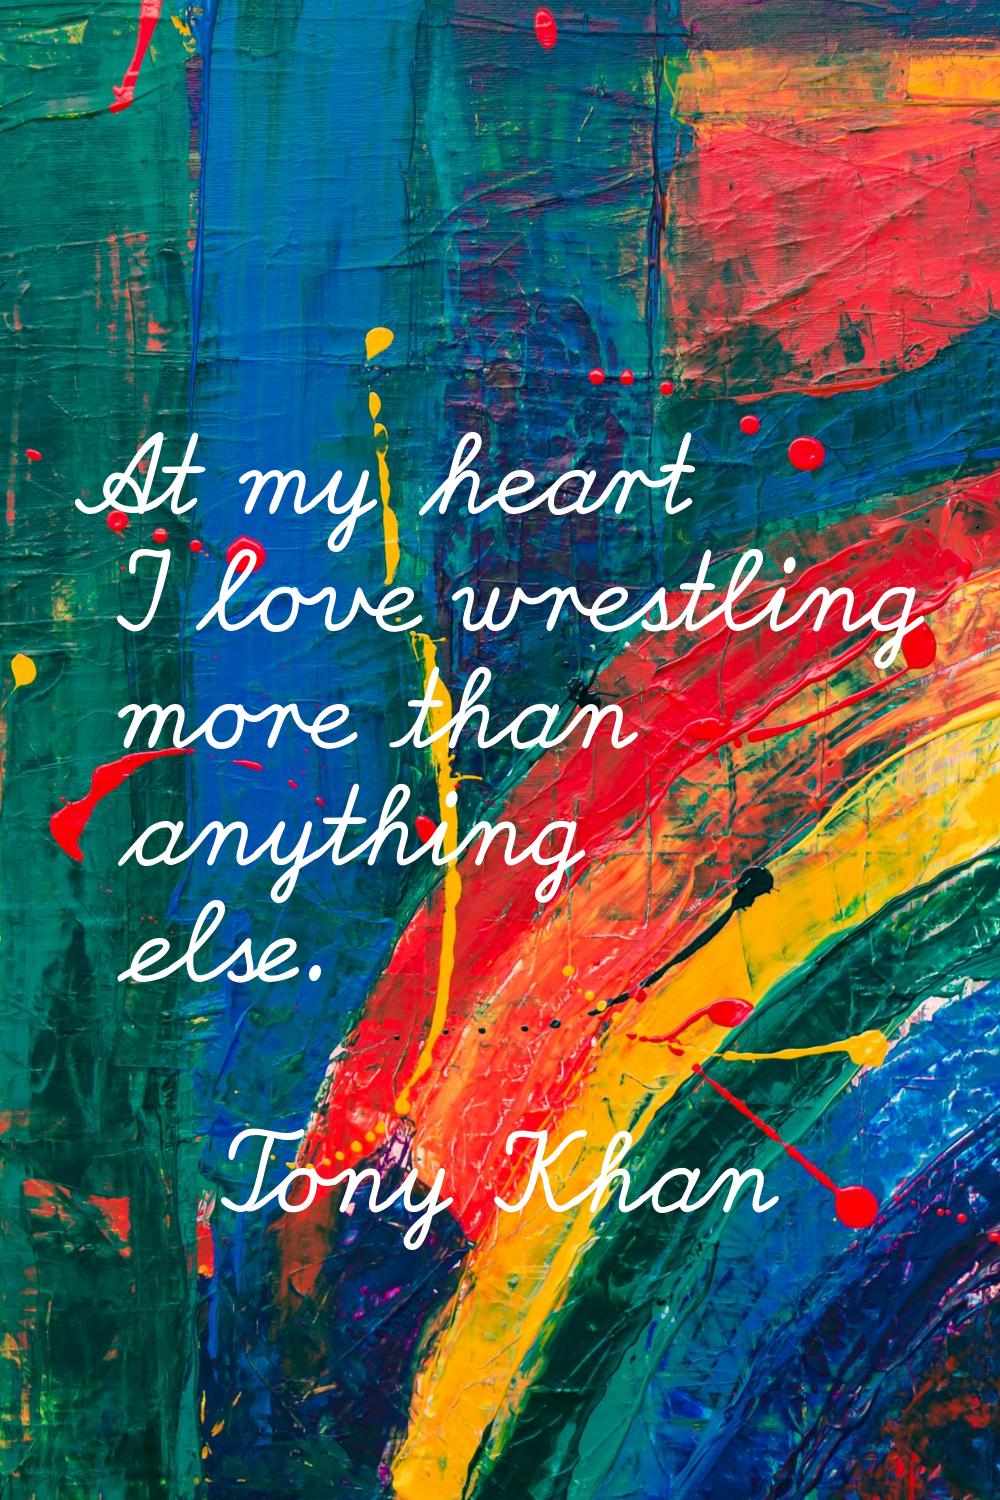 At my heart I love wrestling more than anything else.